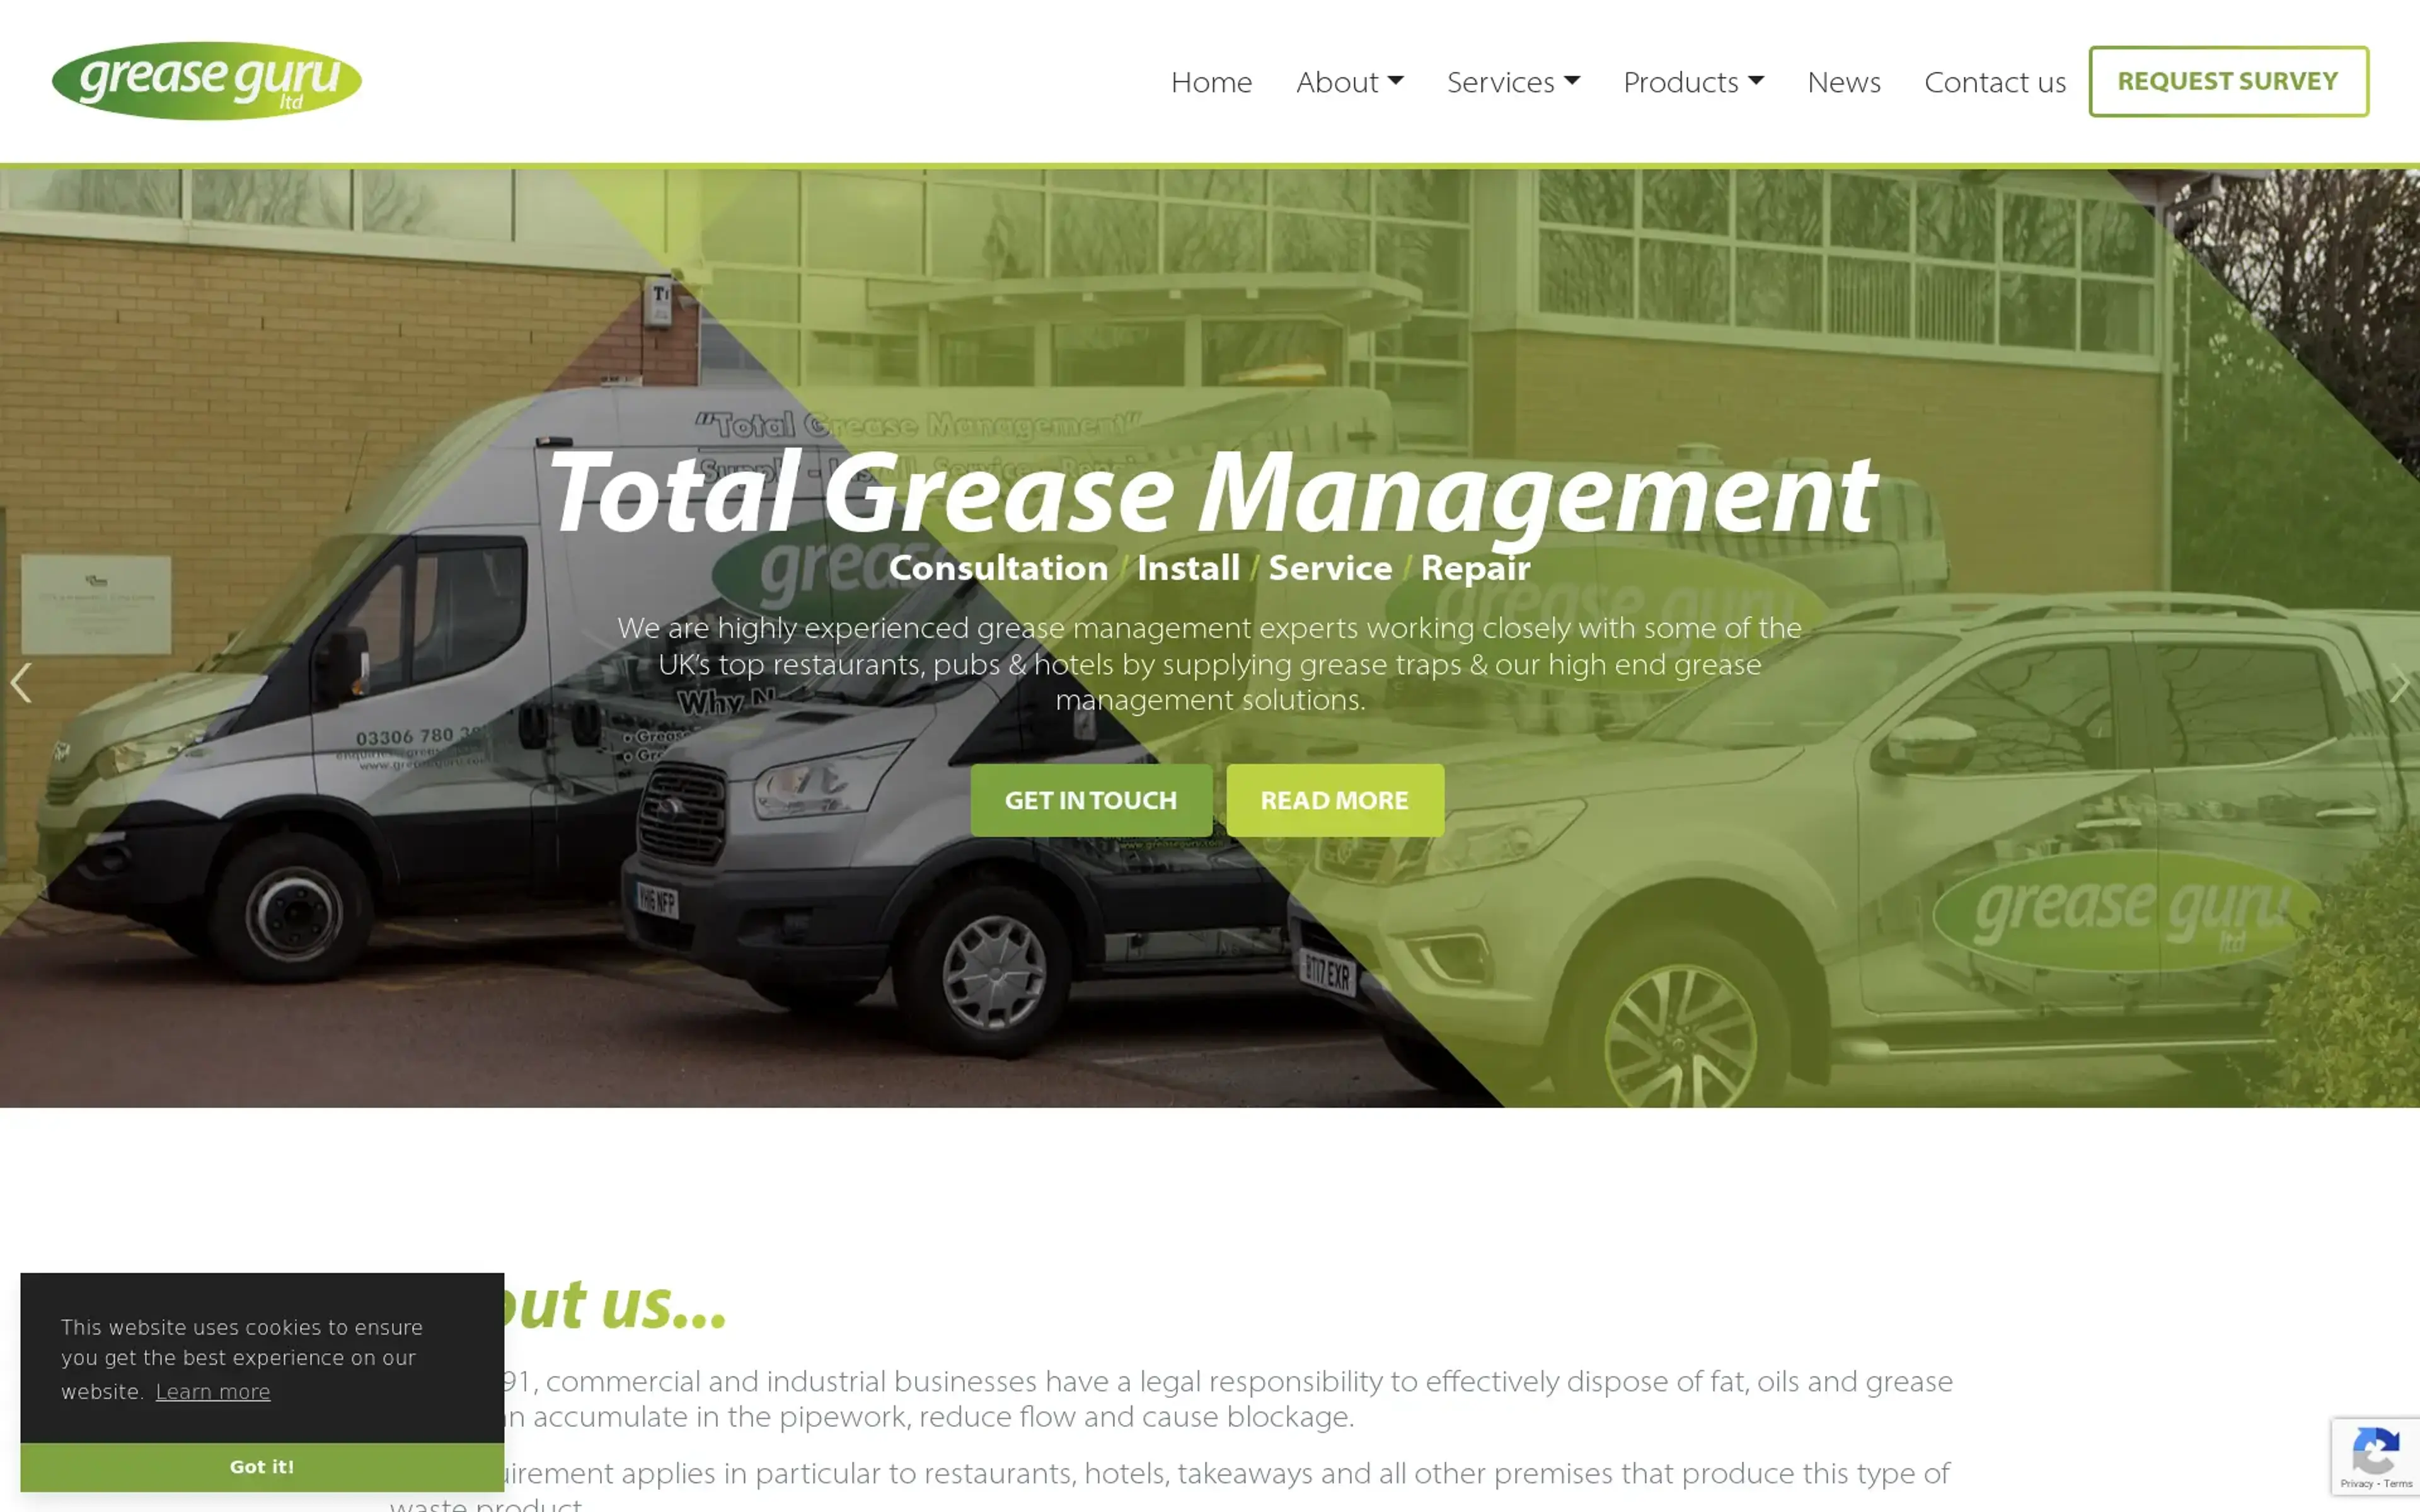 Recent project we worked on for Grease Guru